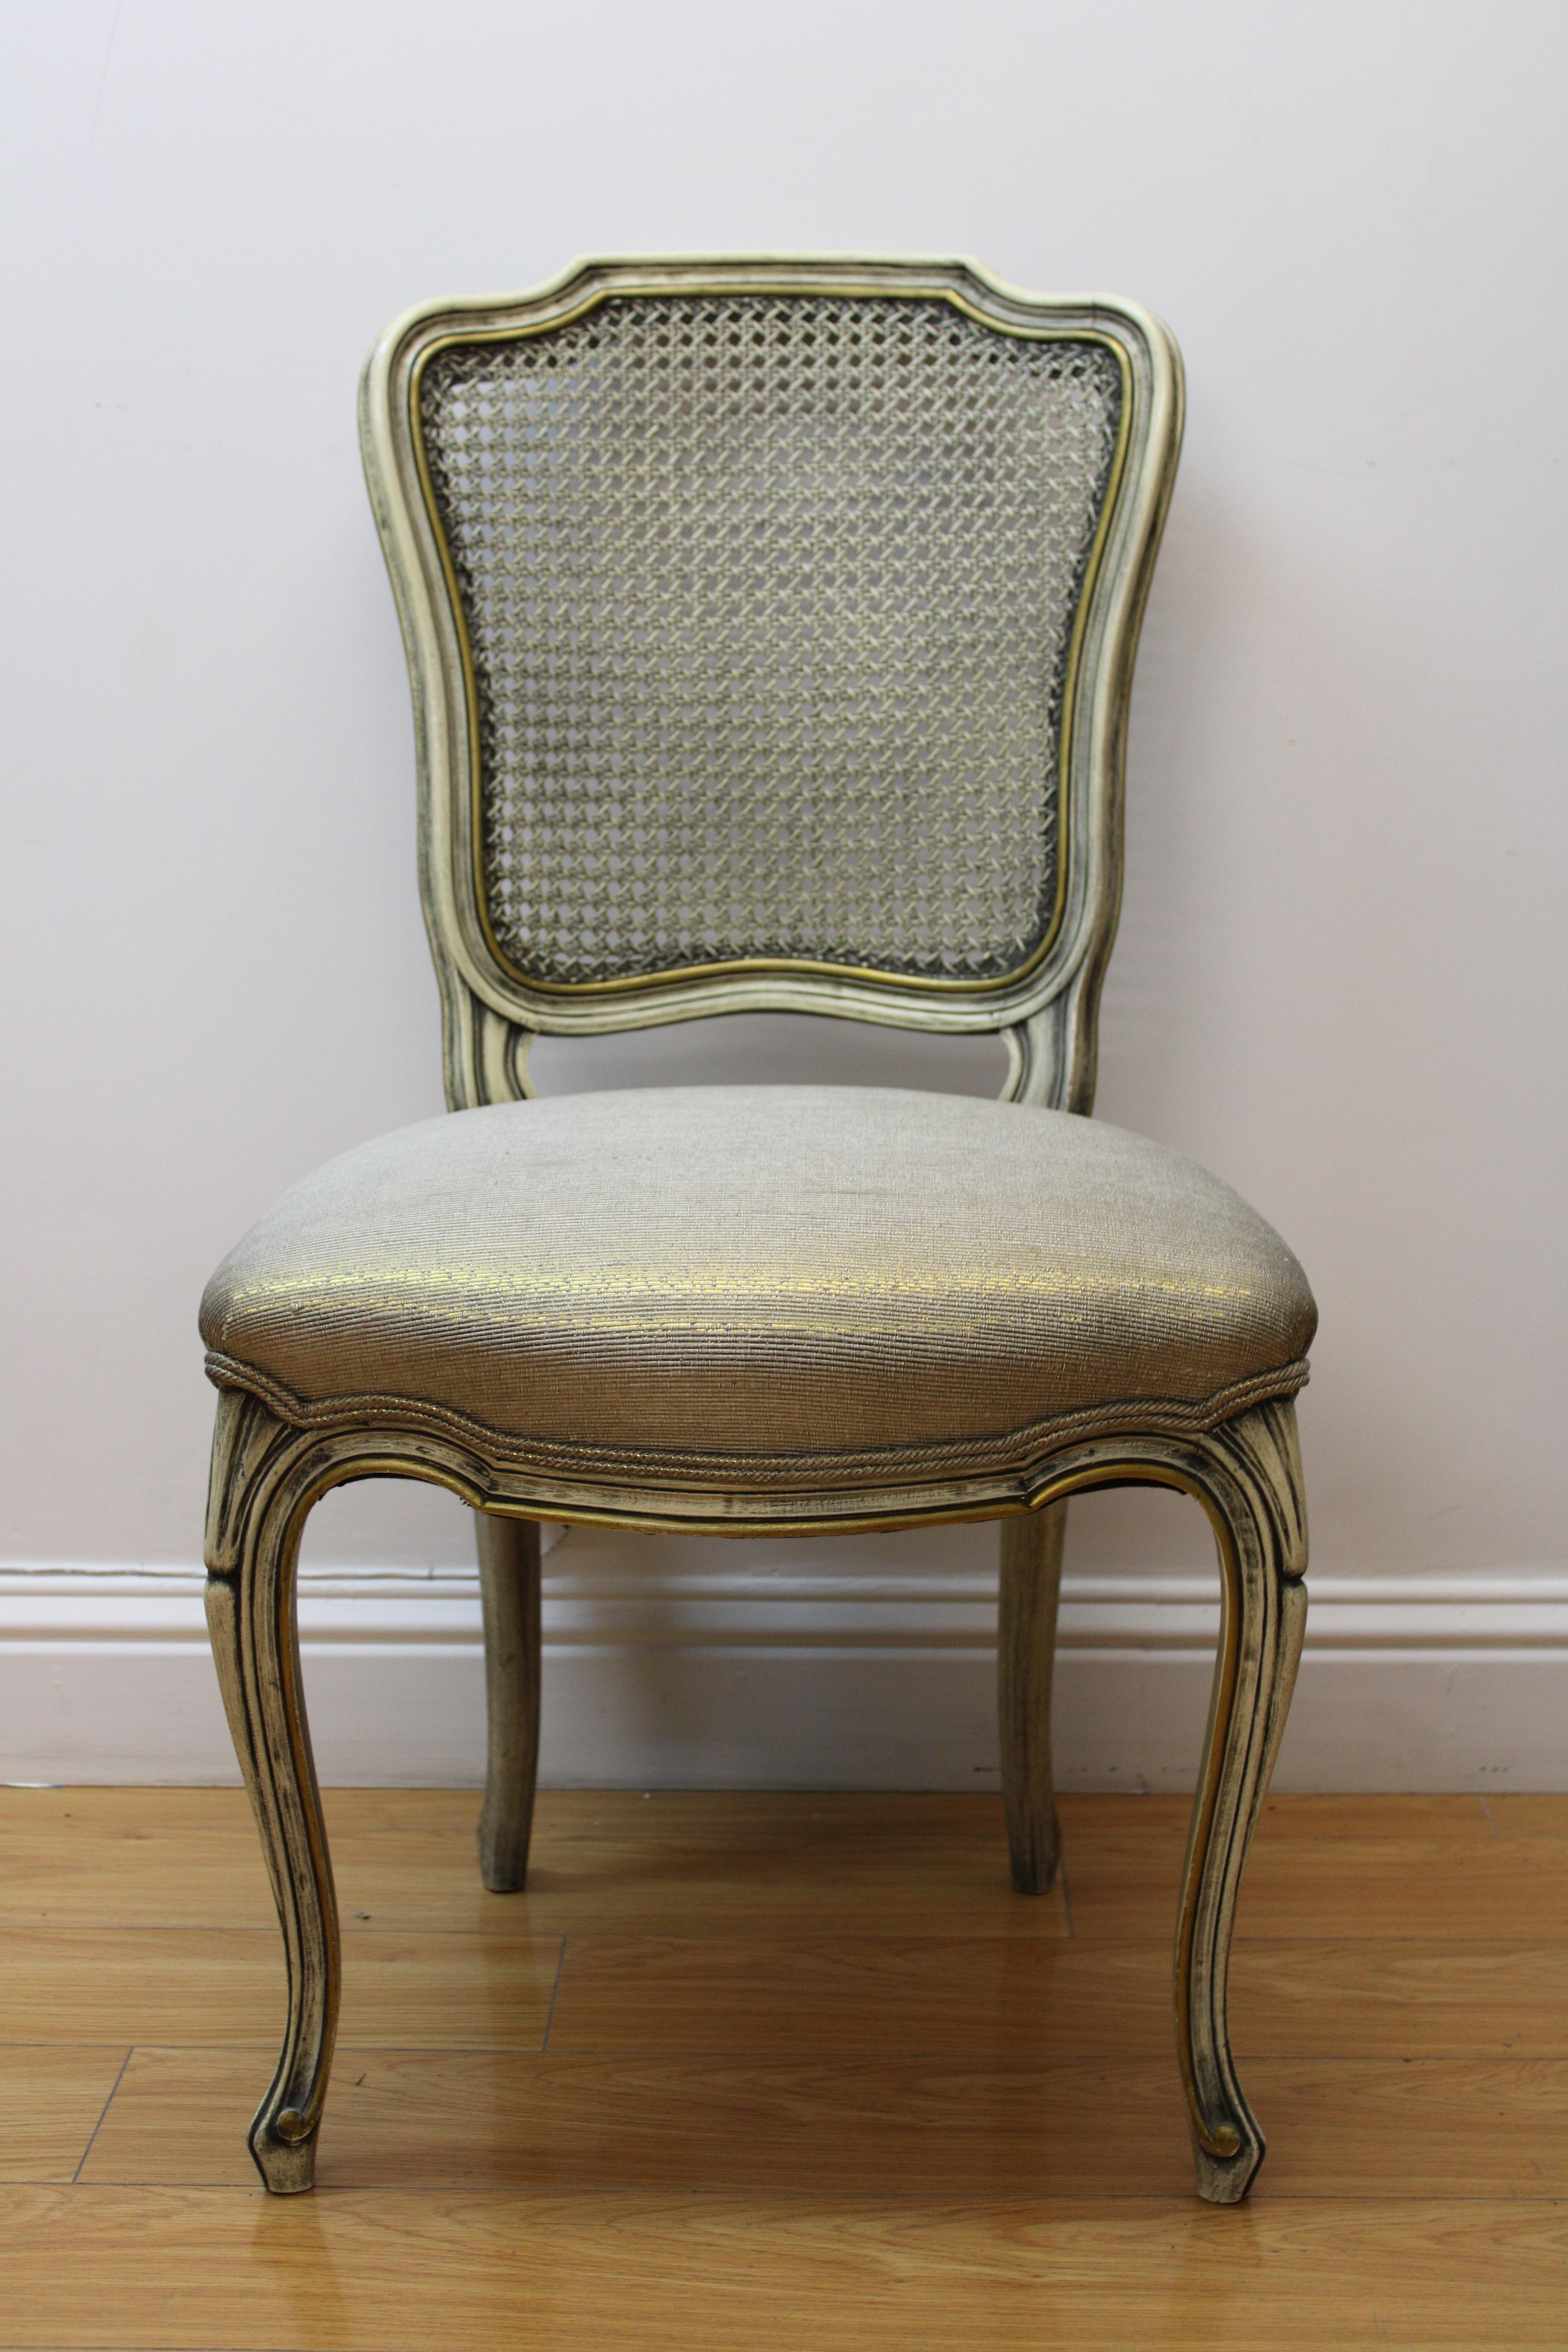 C. 20th Century

French carved side chairs w/ caned backs & upholstered seats. Hand painted in cream & gold.